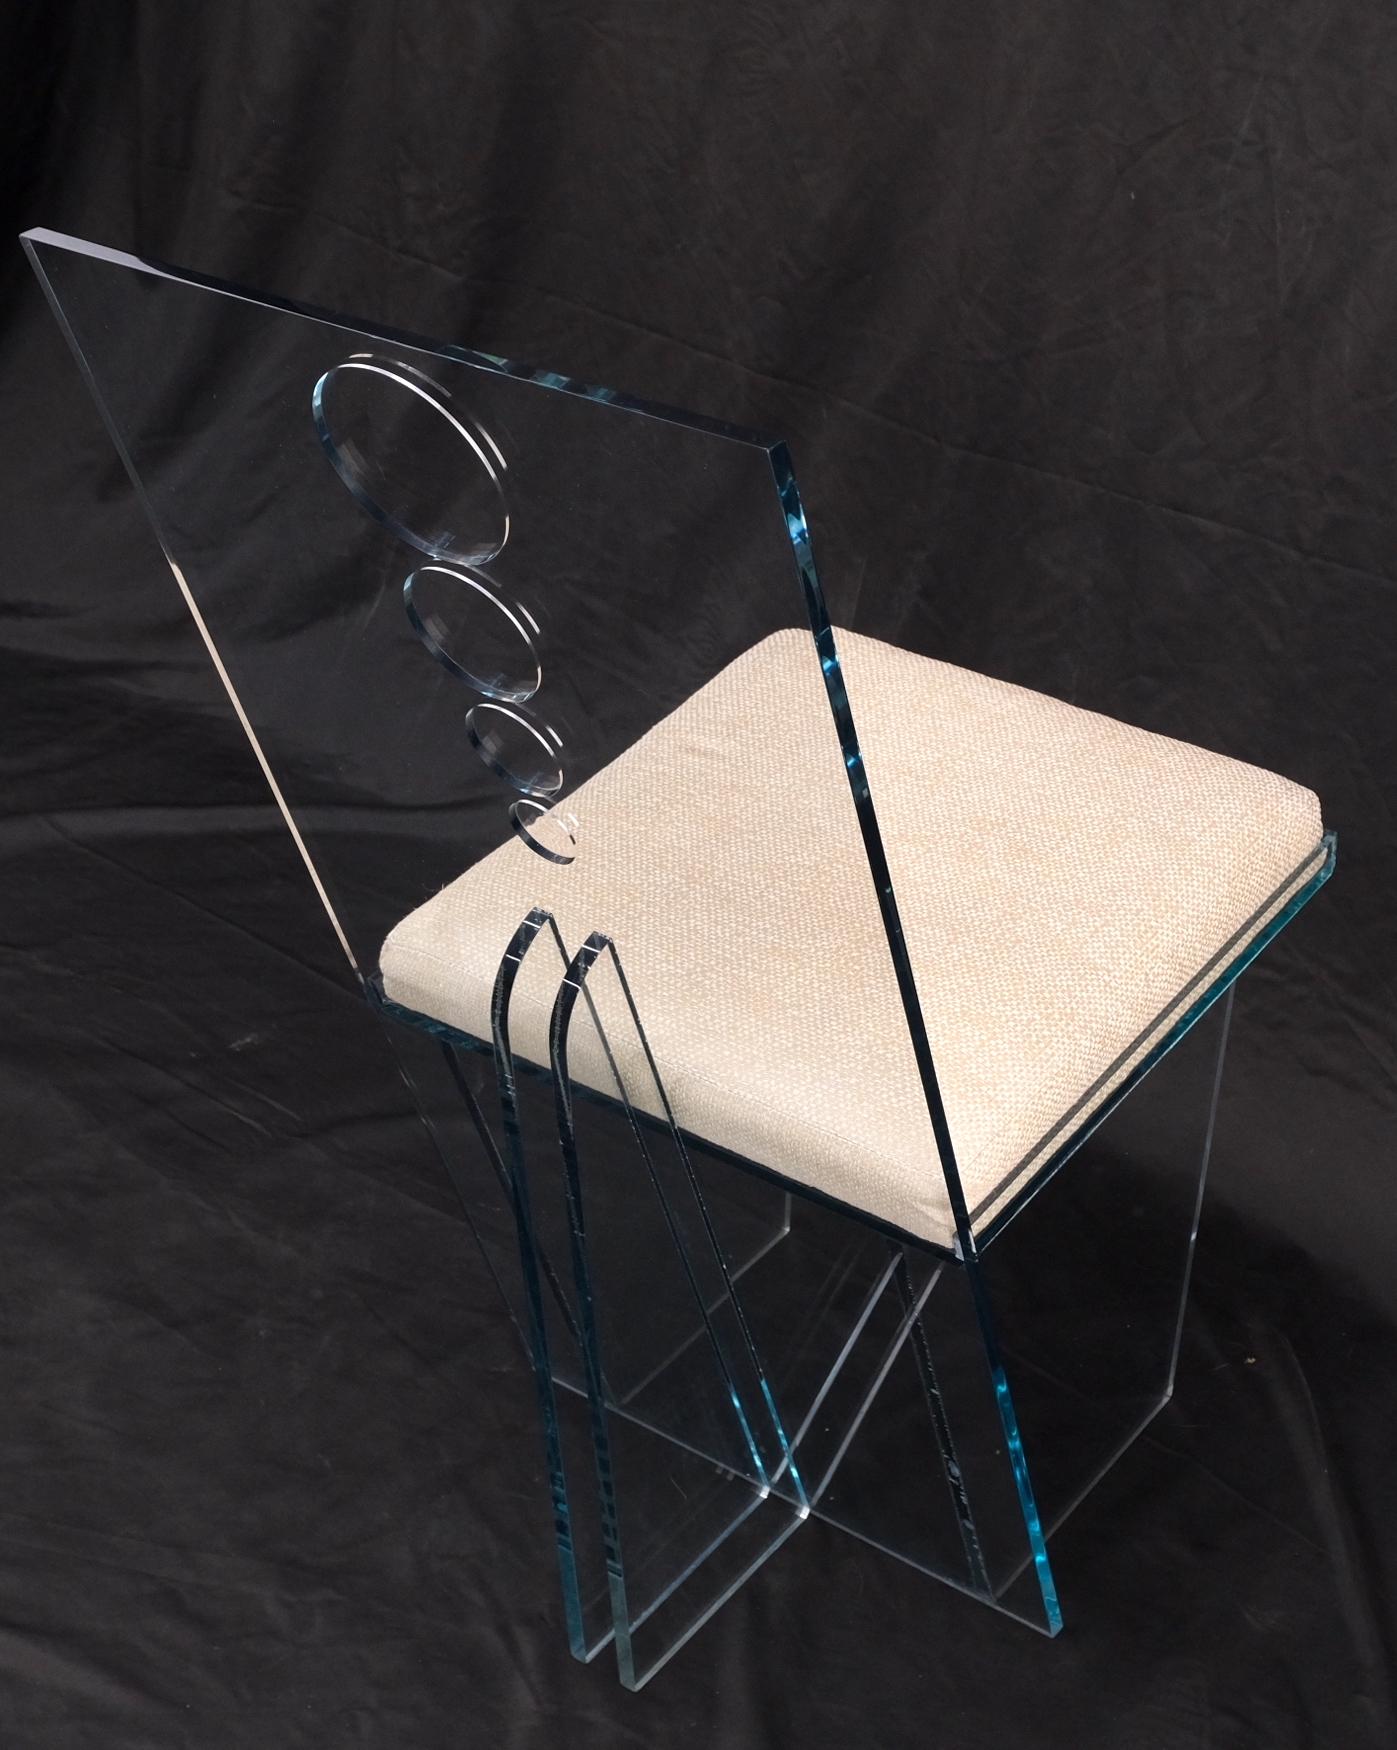 Charles Hollis Jones 'Wisteria' Lucite Dining Chair Introduced, 1968 For Sale 8